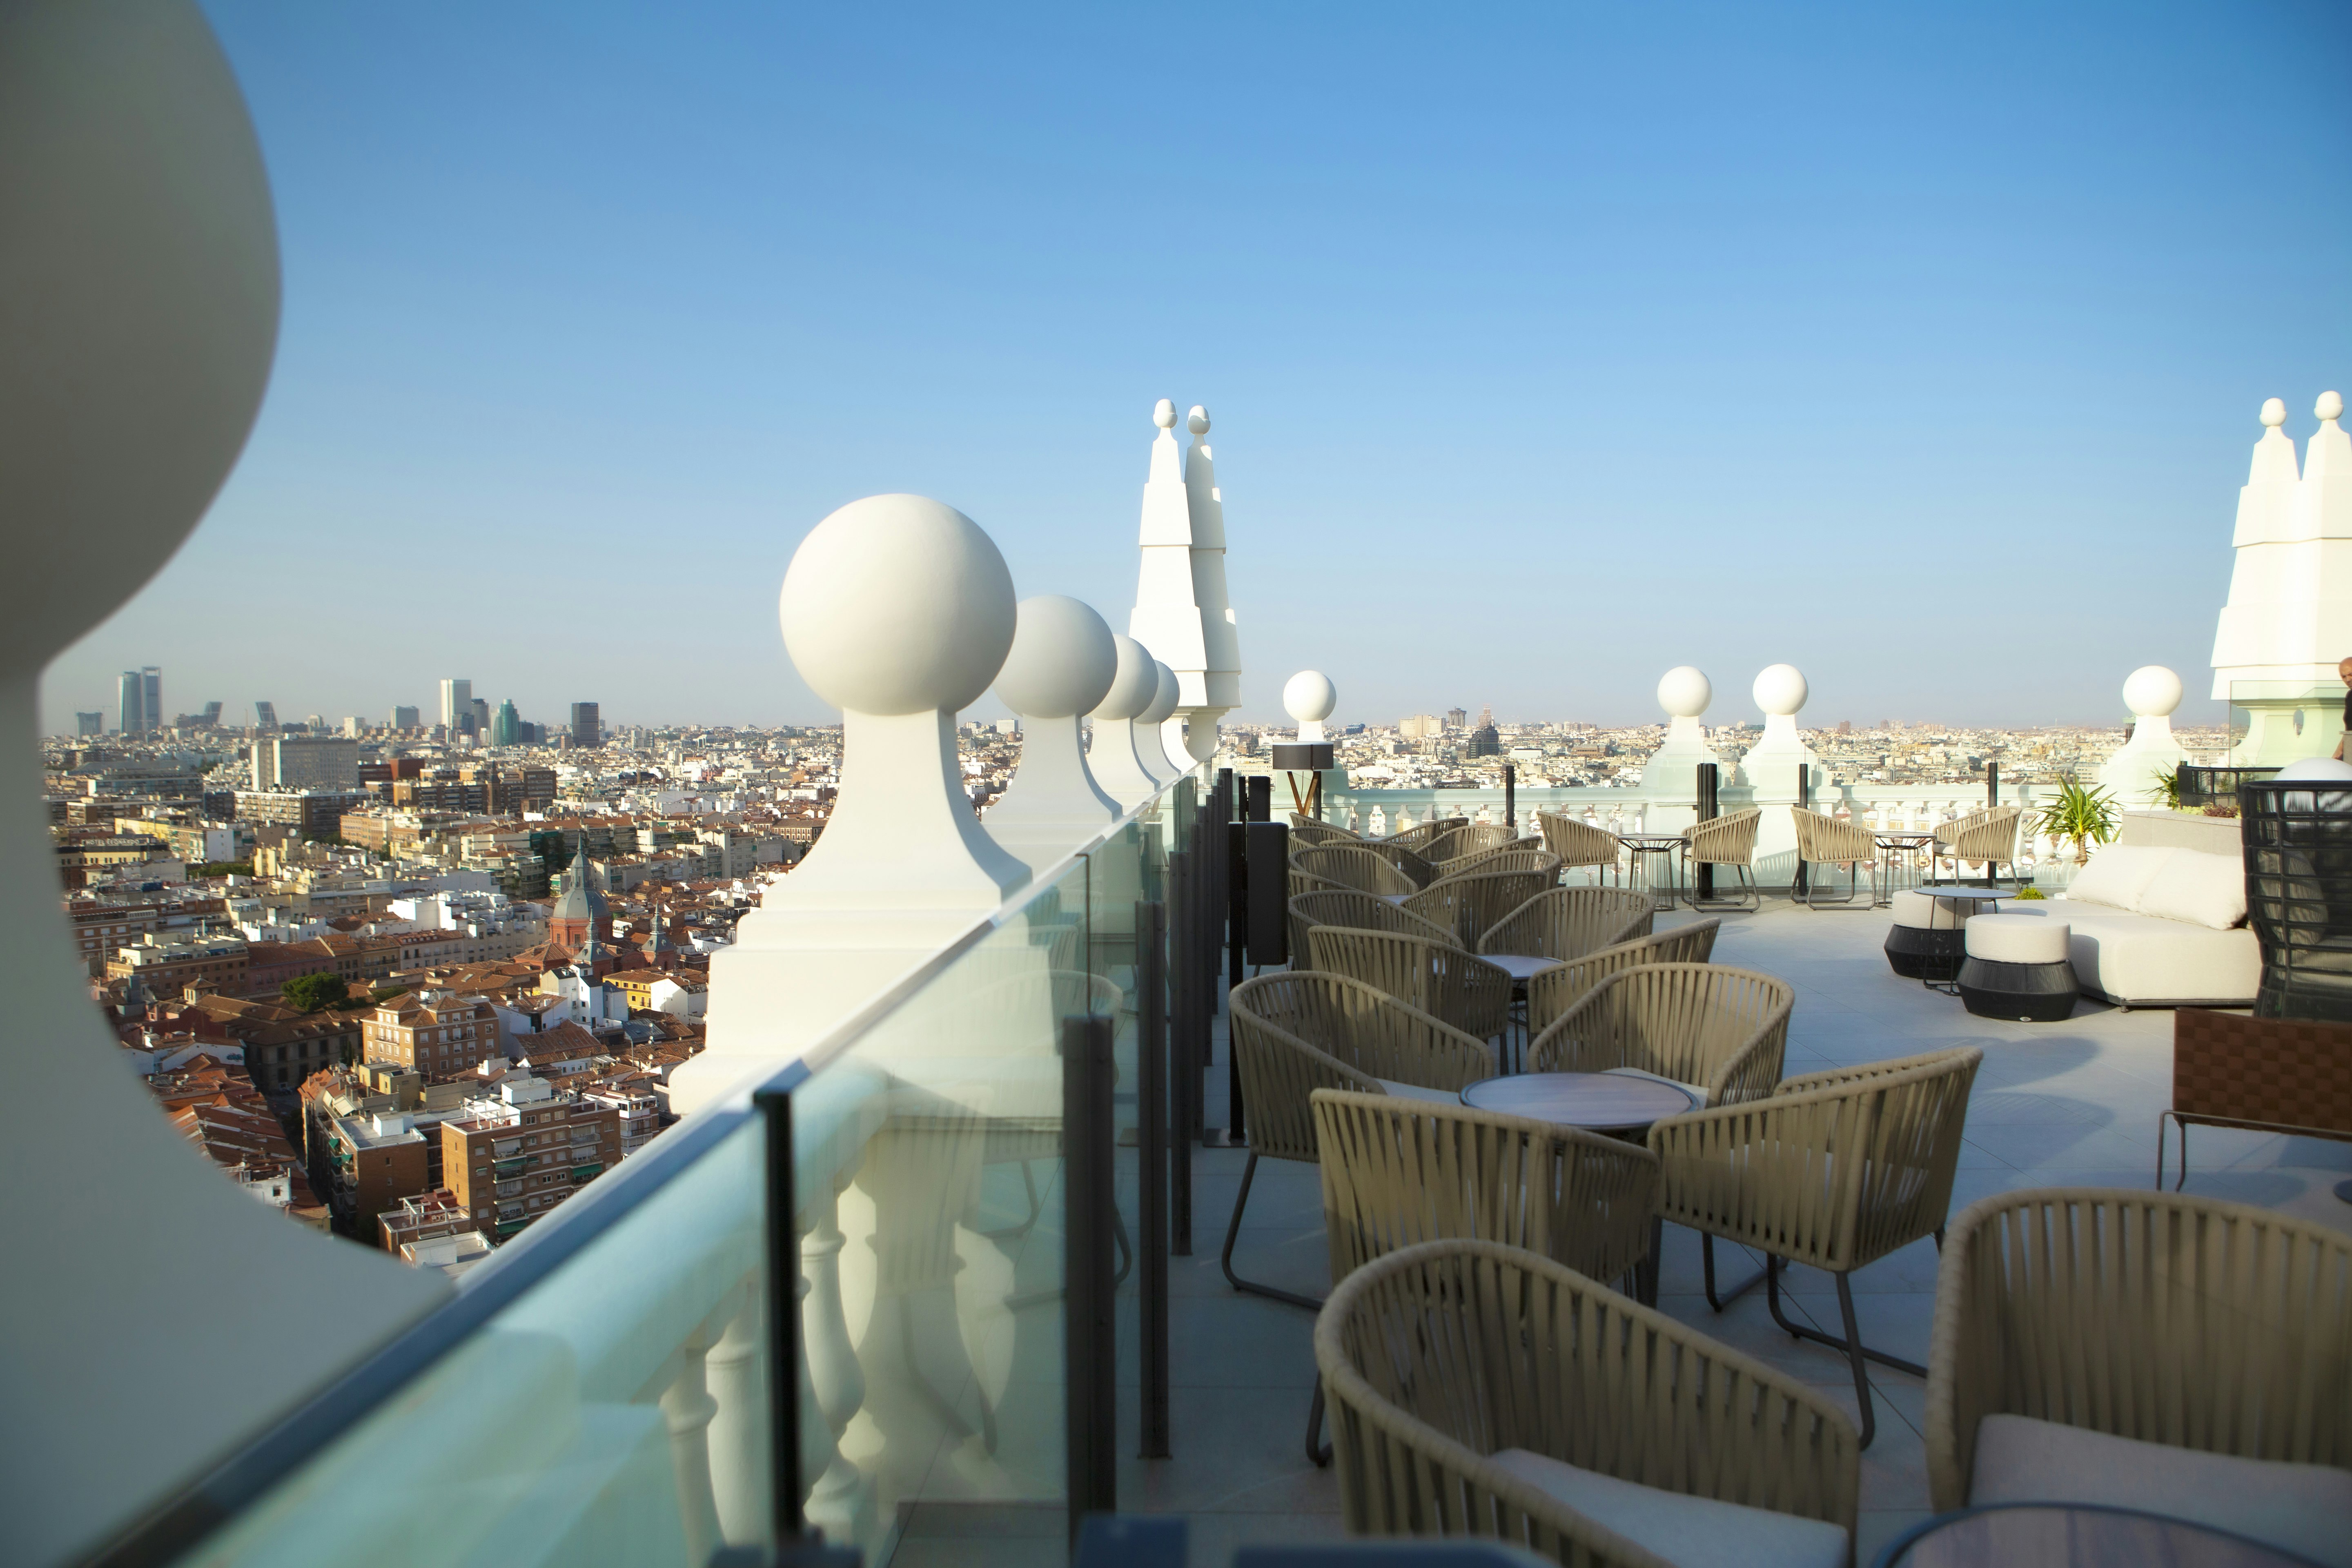 Madrid skyline as viewed from a rooftop terrace